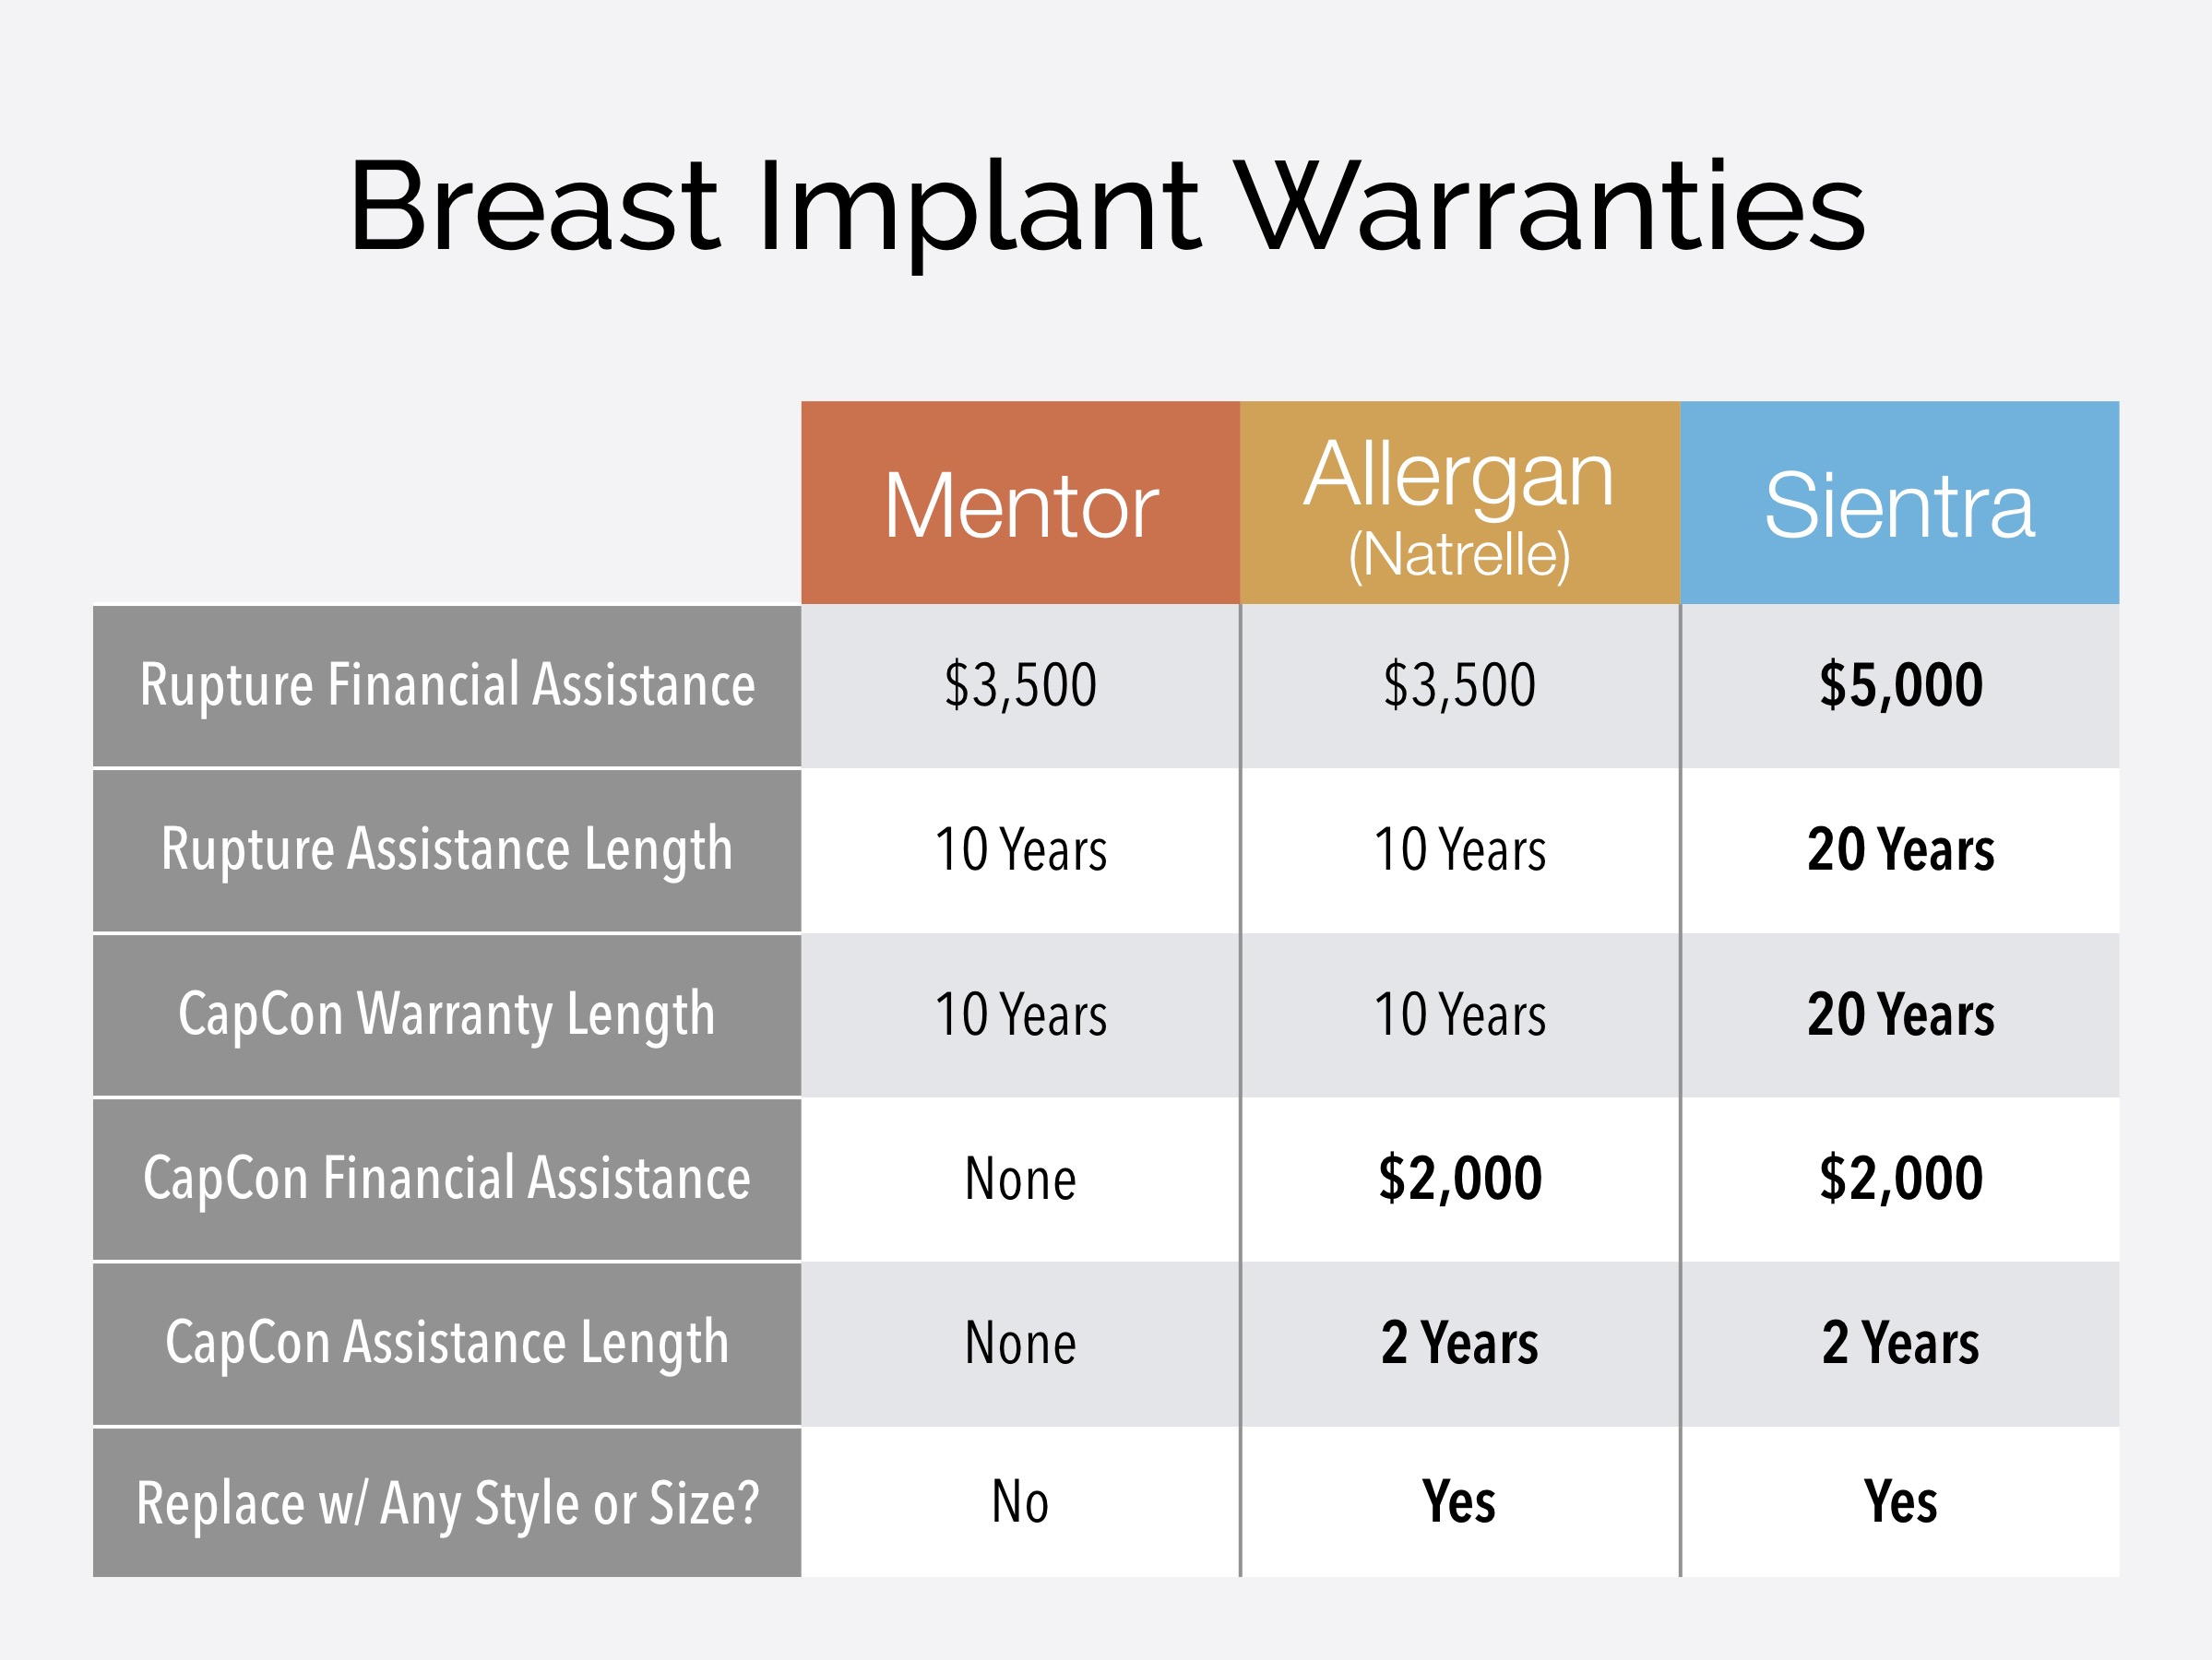 Sientra Implant Size Chart - Sientra Implants Size Chart.